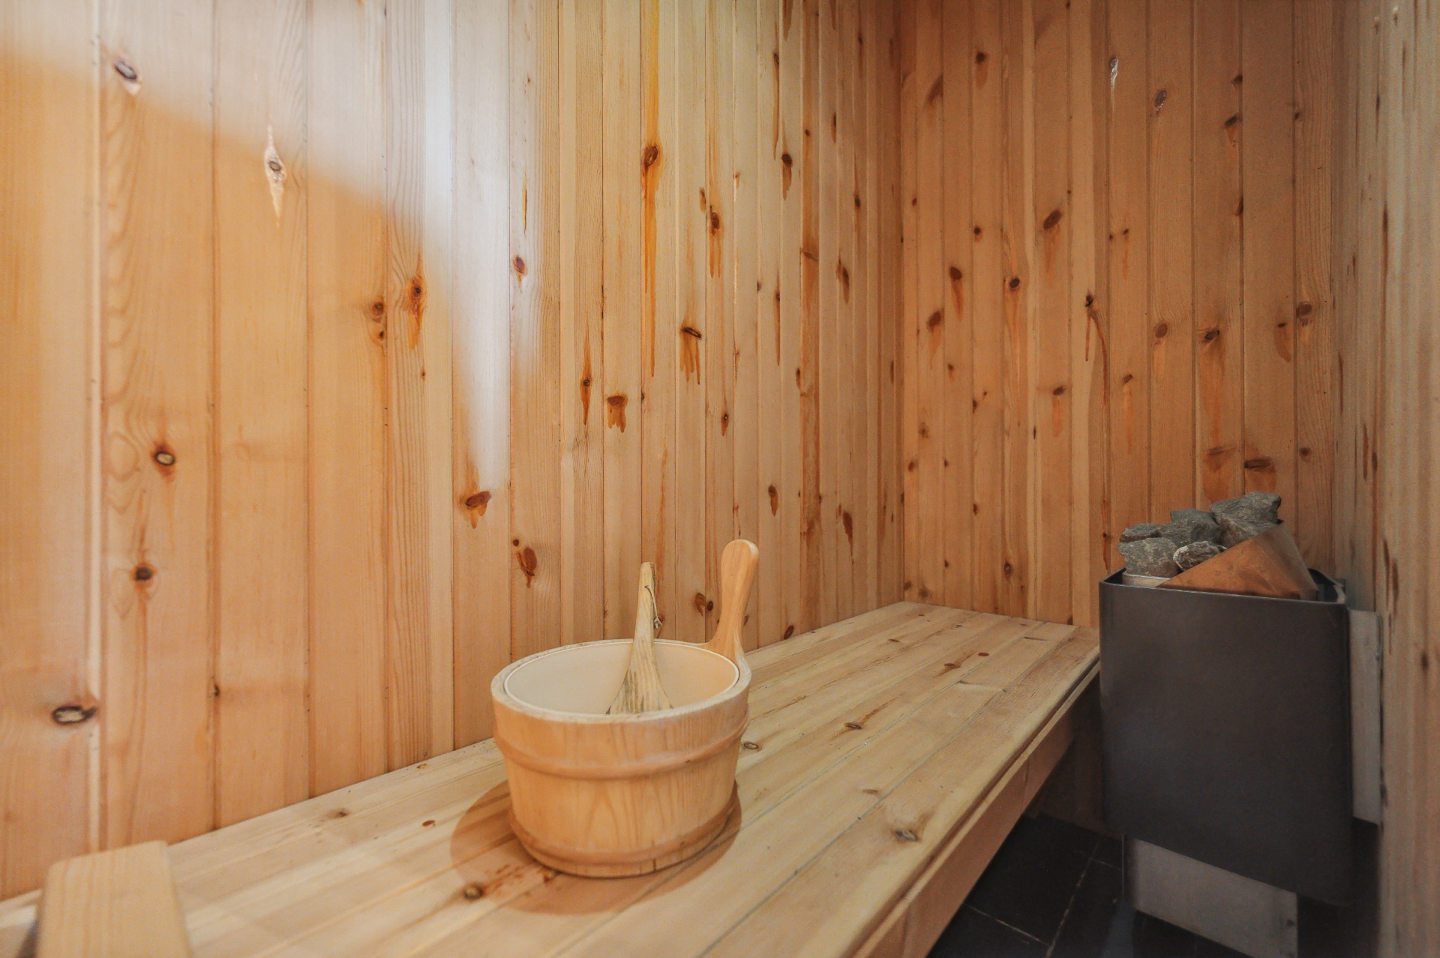 The sauna, which is attached to the ensuite